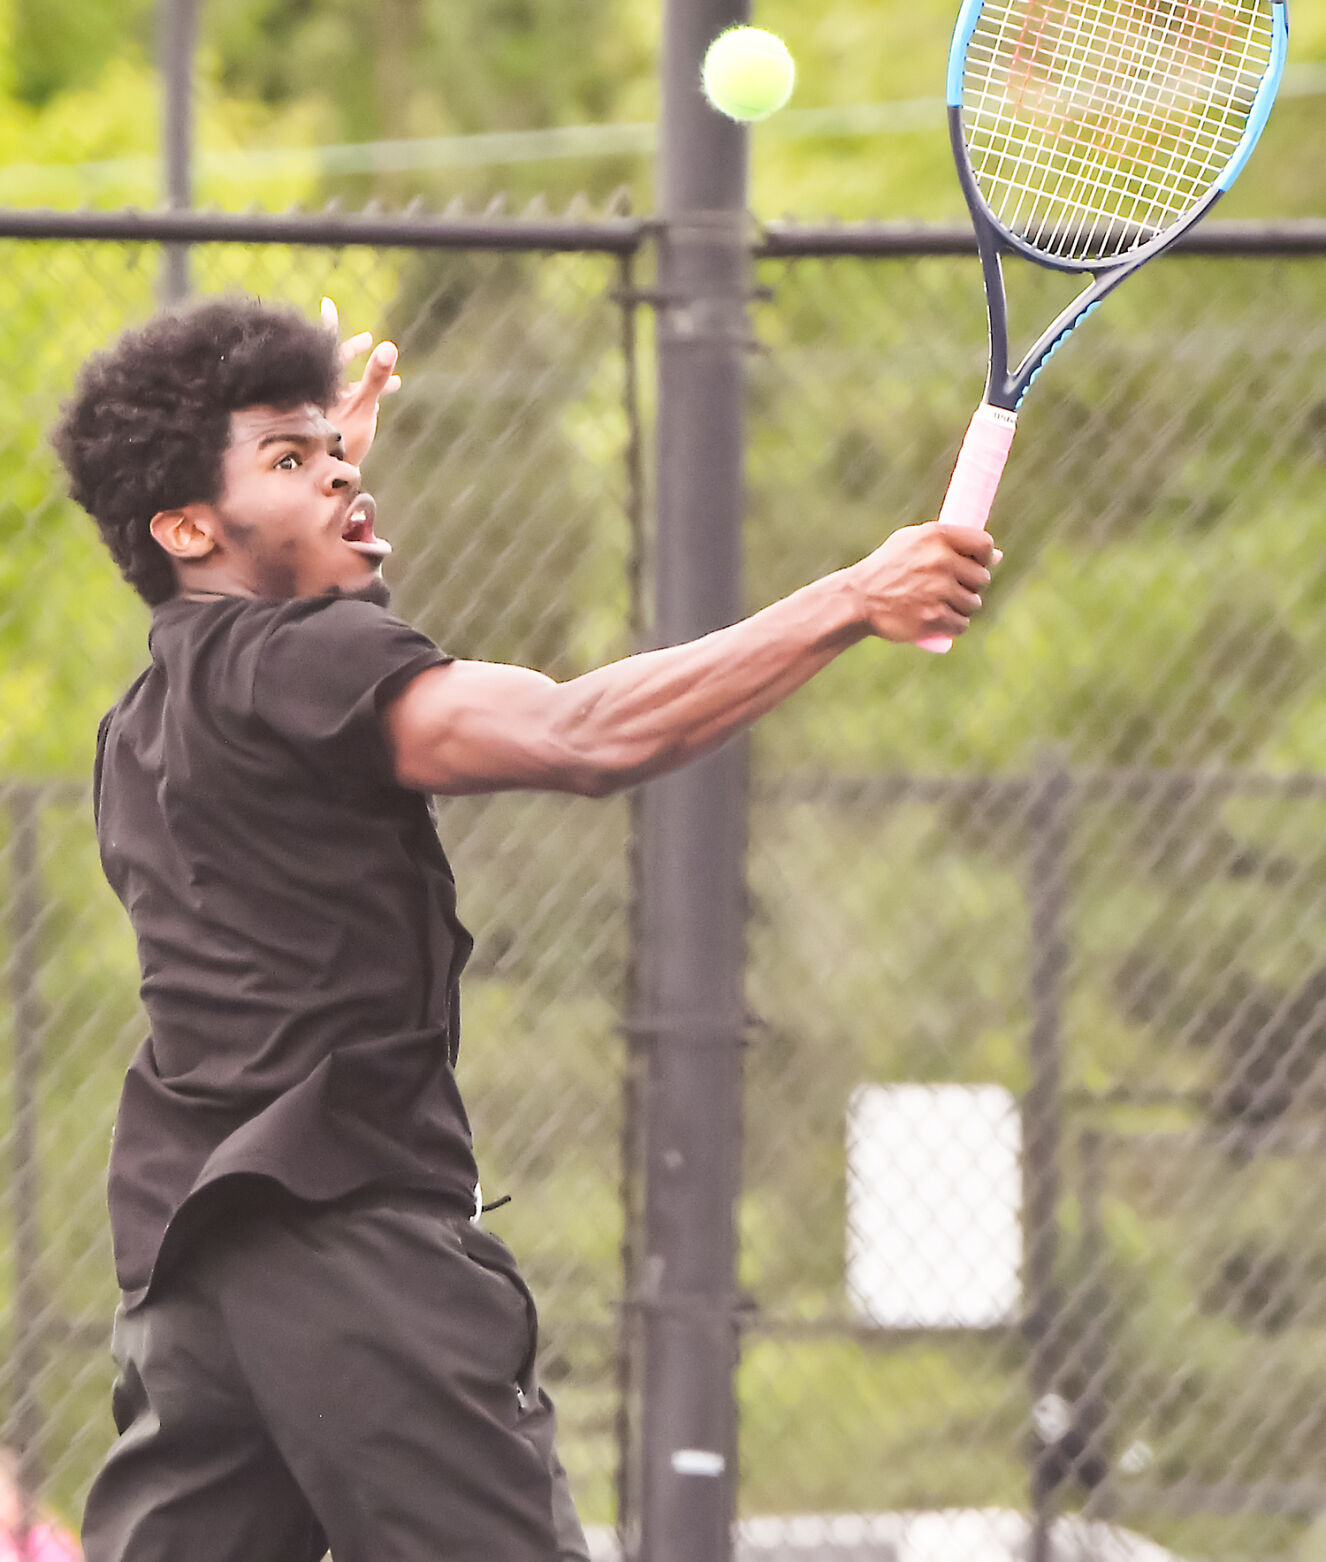 Local players to appear in regional tennis tournaments